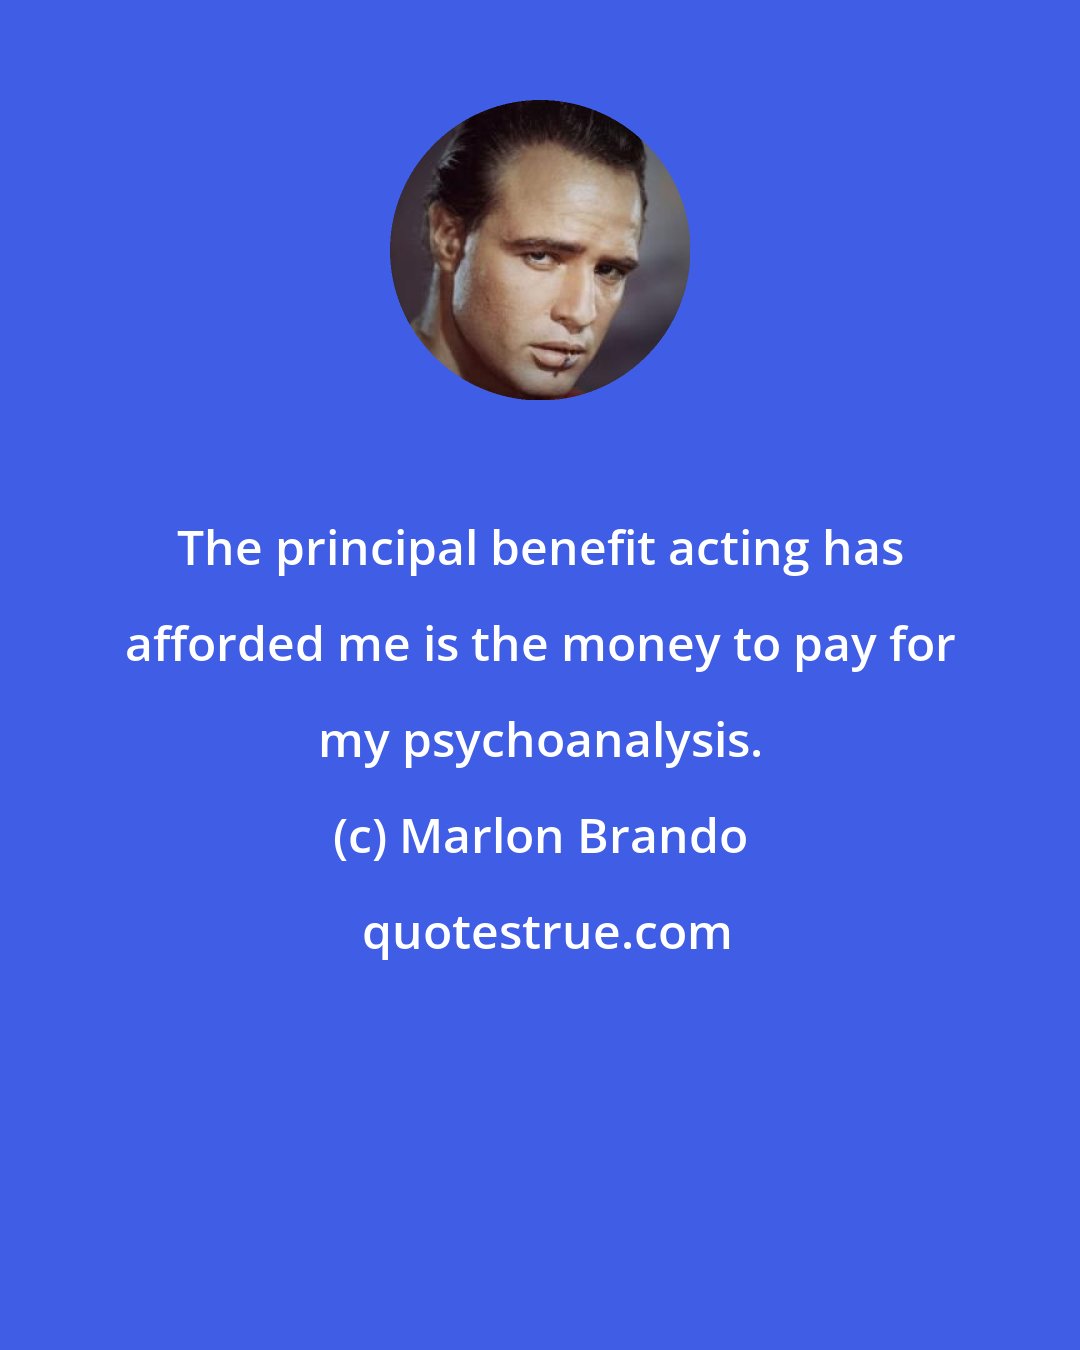 Marlon Brando: The principal benefit acting has afforded me is the money to pay for my psychoanalysis.